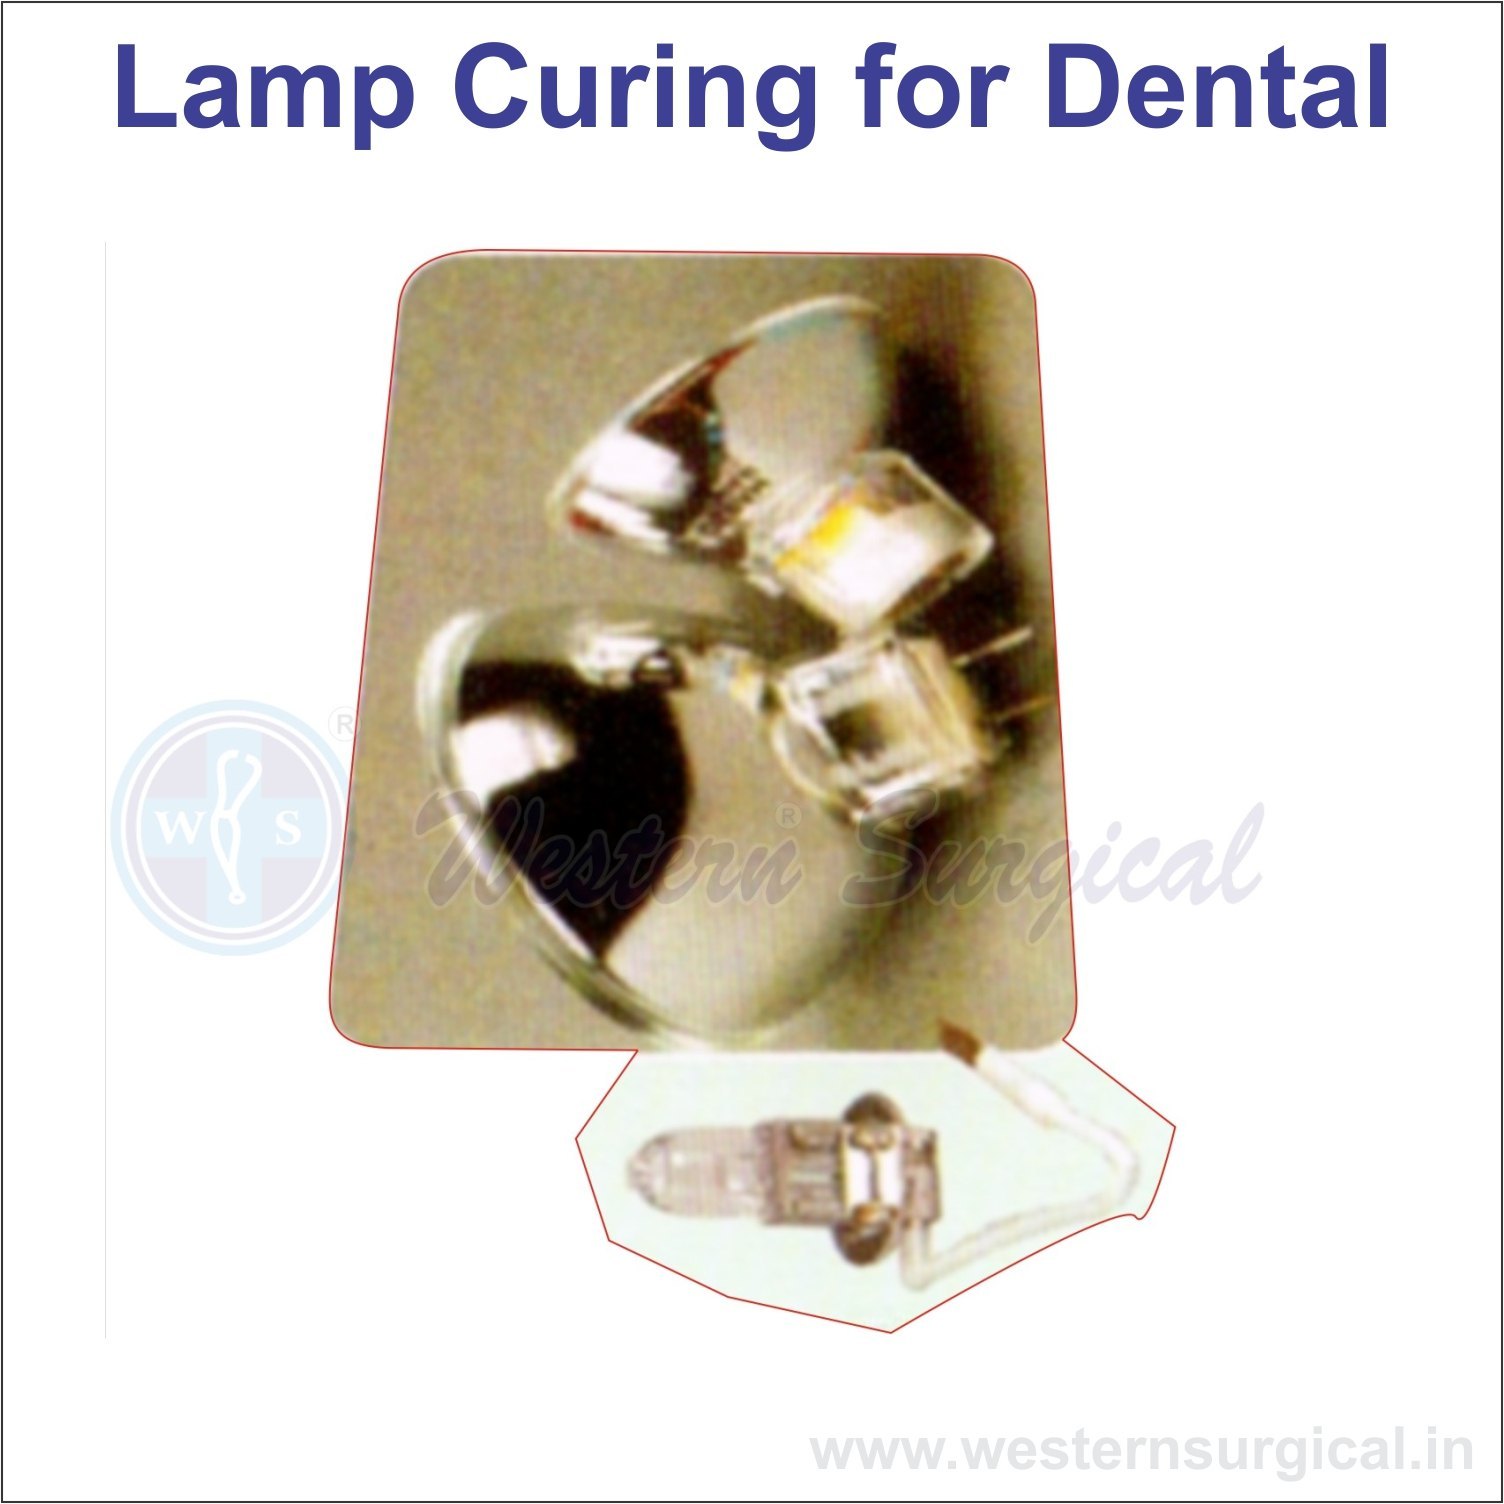 Lamp Curing For Dental